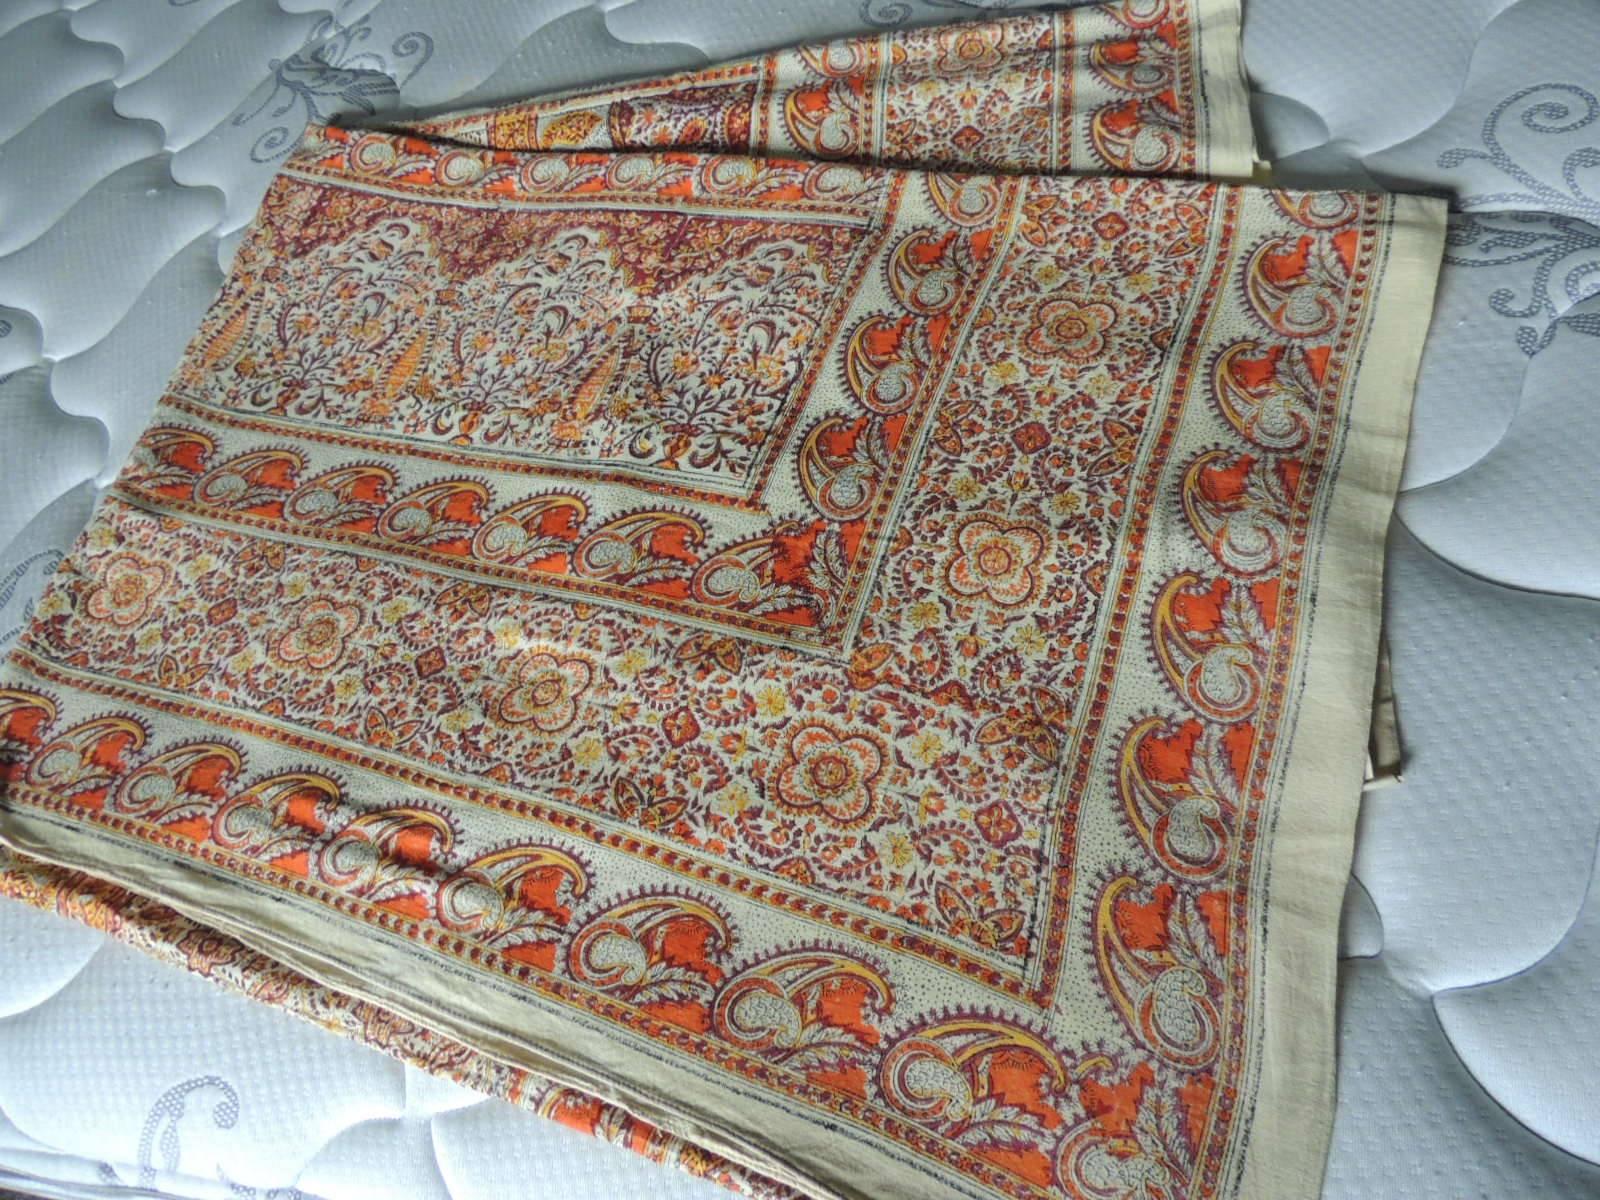 Vintage orange and yellow hand-blocked Indian cloth/bed spread. In shades of natural, orange, yellow and red.
These hand-printed textiles come from the region around Gujarat, India. They are made by different kind of Khatris. These textile fragments